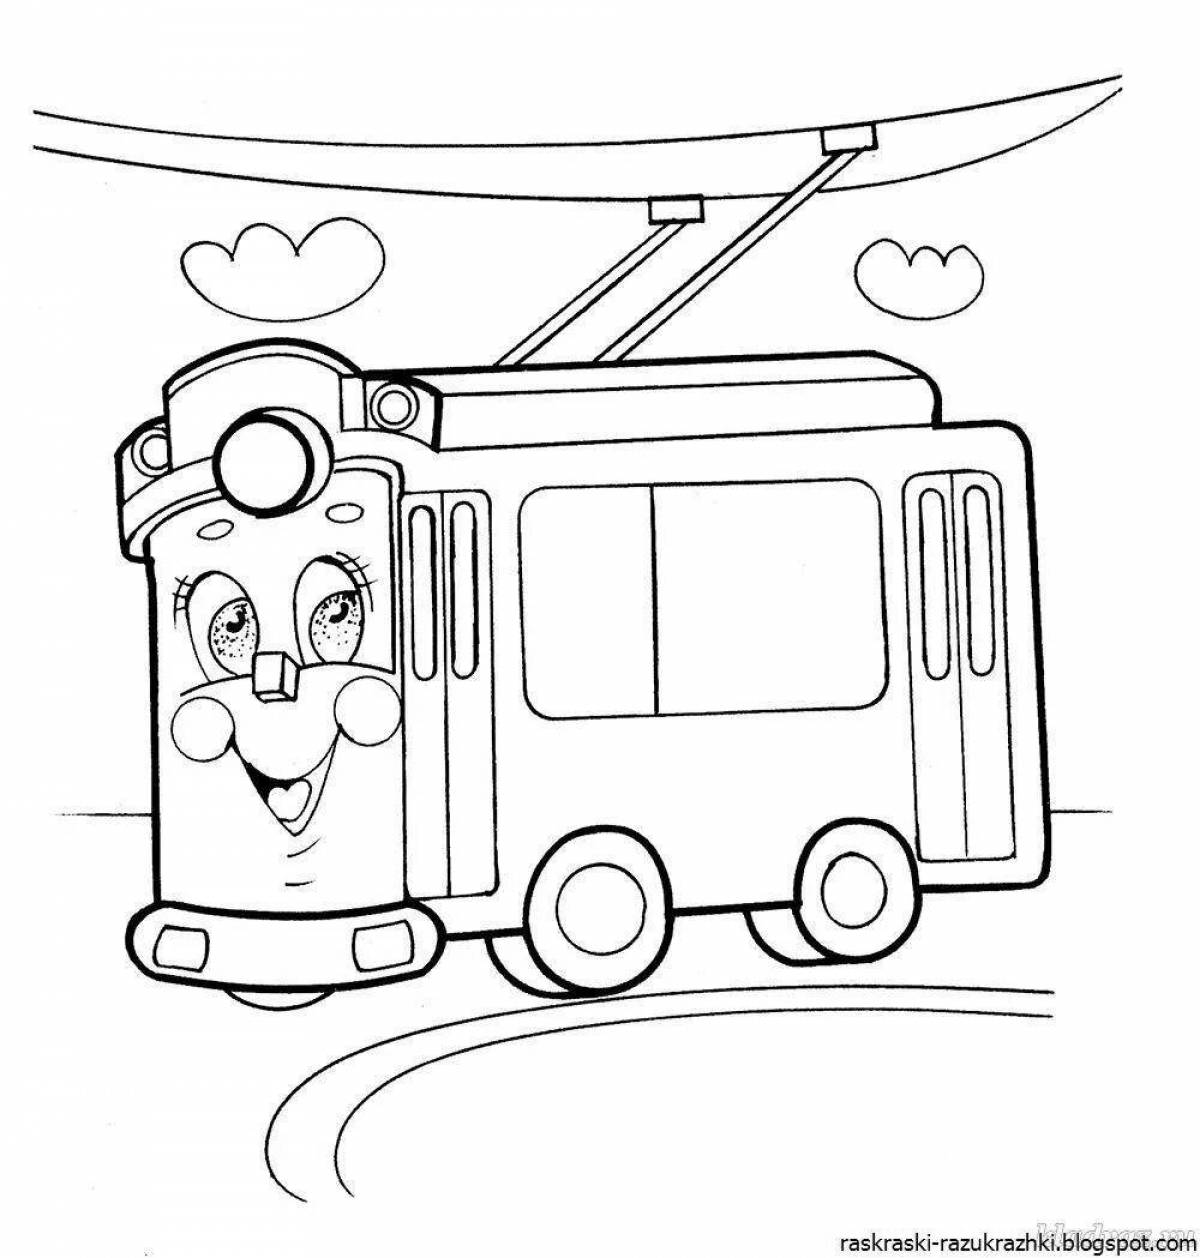 Playful tram coloring page for kids